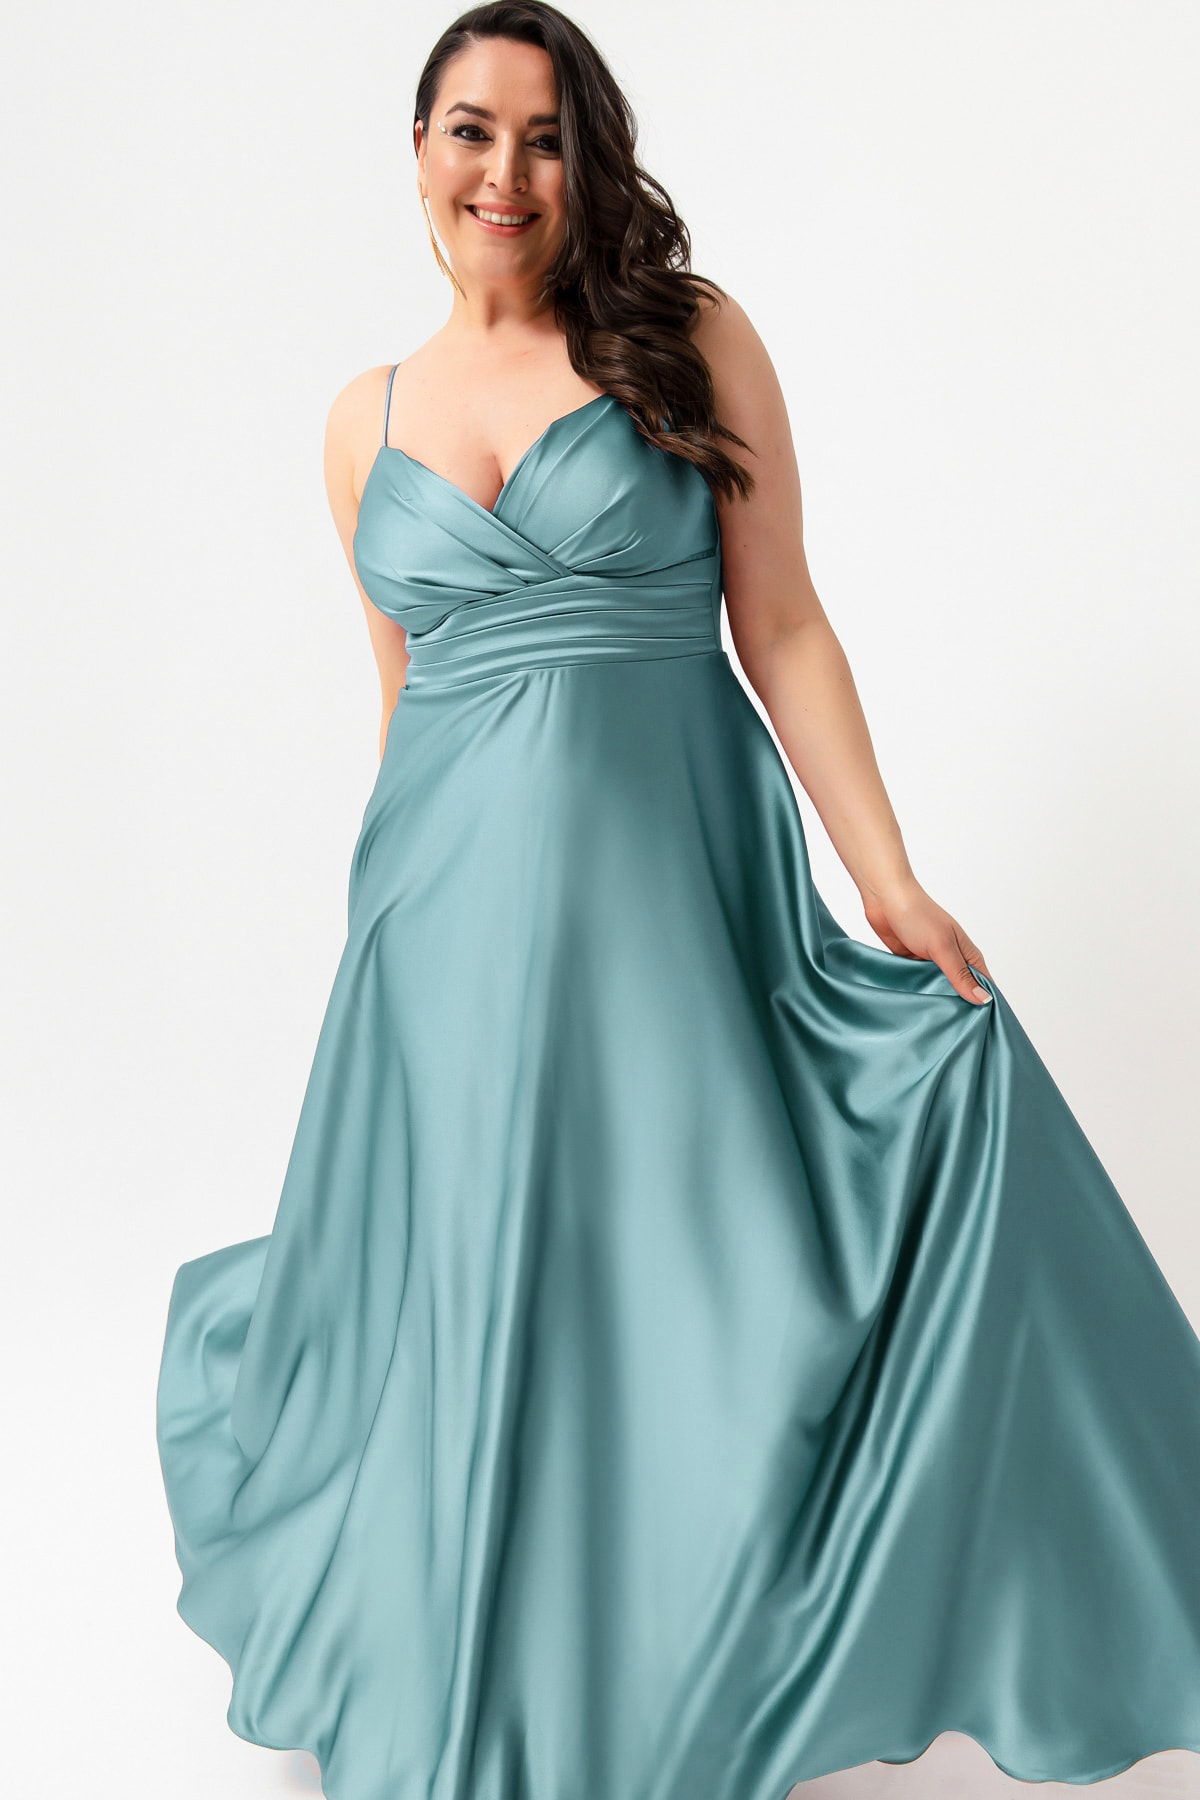 Lafaba Women's Plus Size Satin Long Evening &; Prom Dress With Turquoise Rope Straps